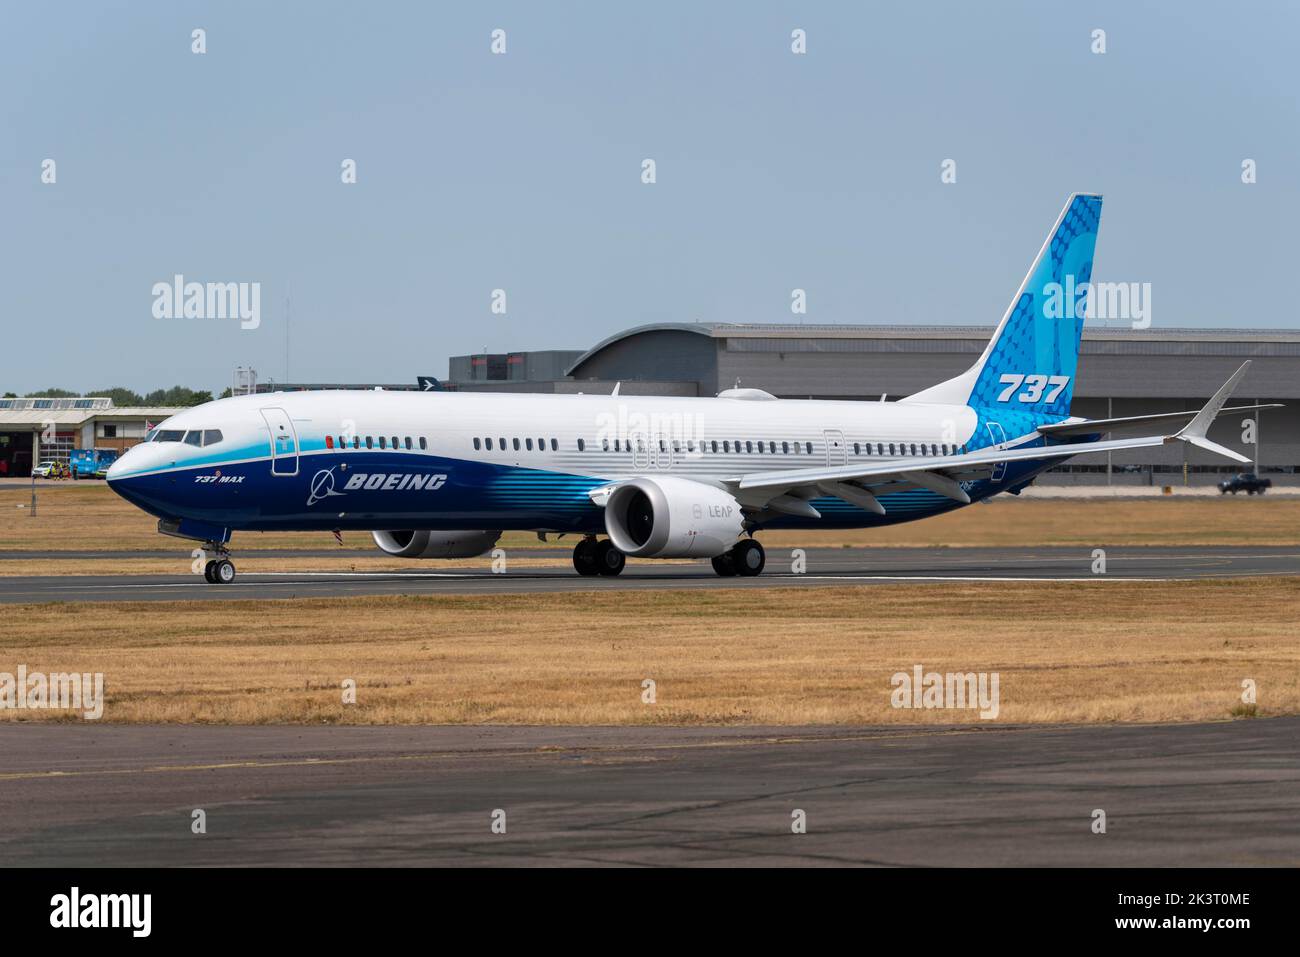 Boeing 737 MAX 10 airliner jet plane, the new version of the MAX series, on runway at the Farnborough International Airshow 2022 after display flight Stock Photo